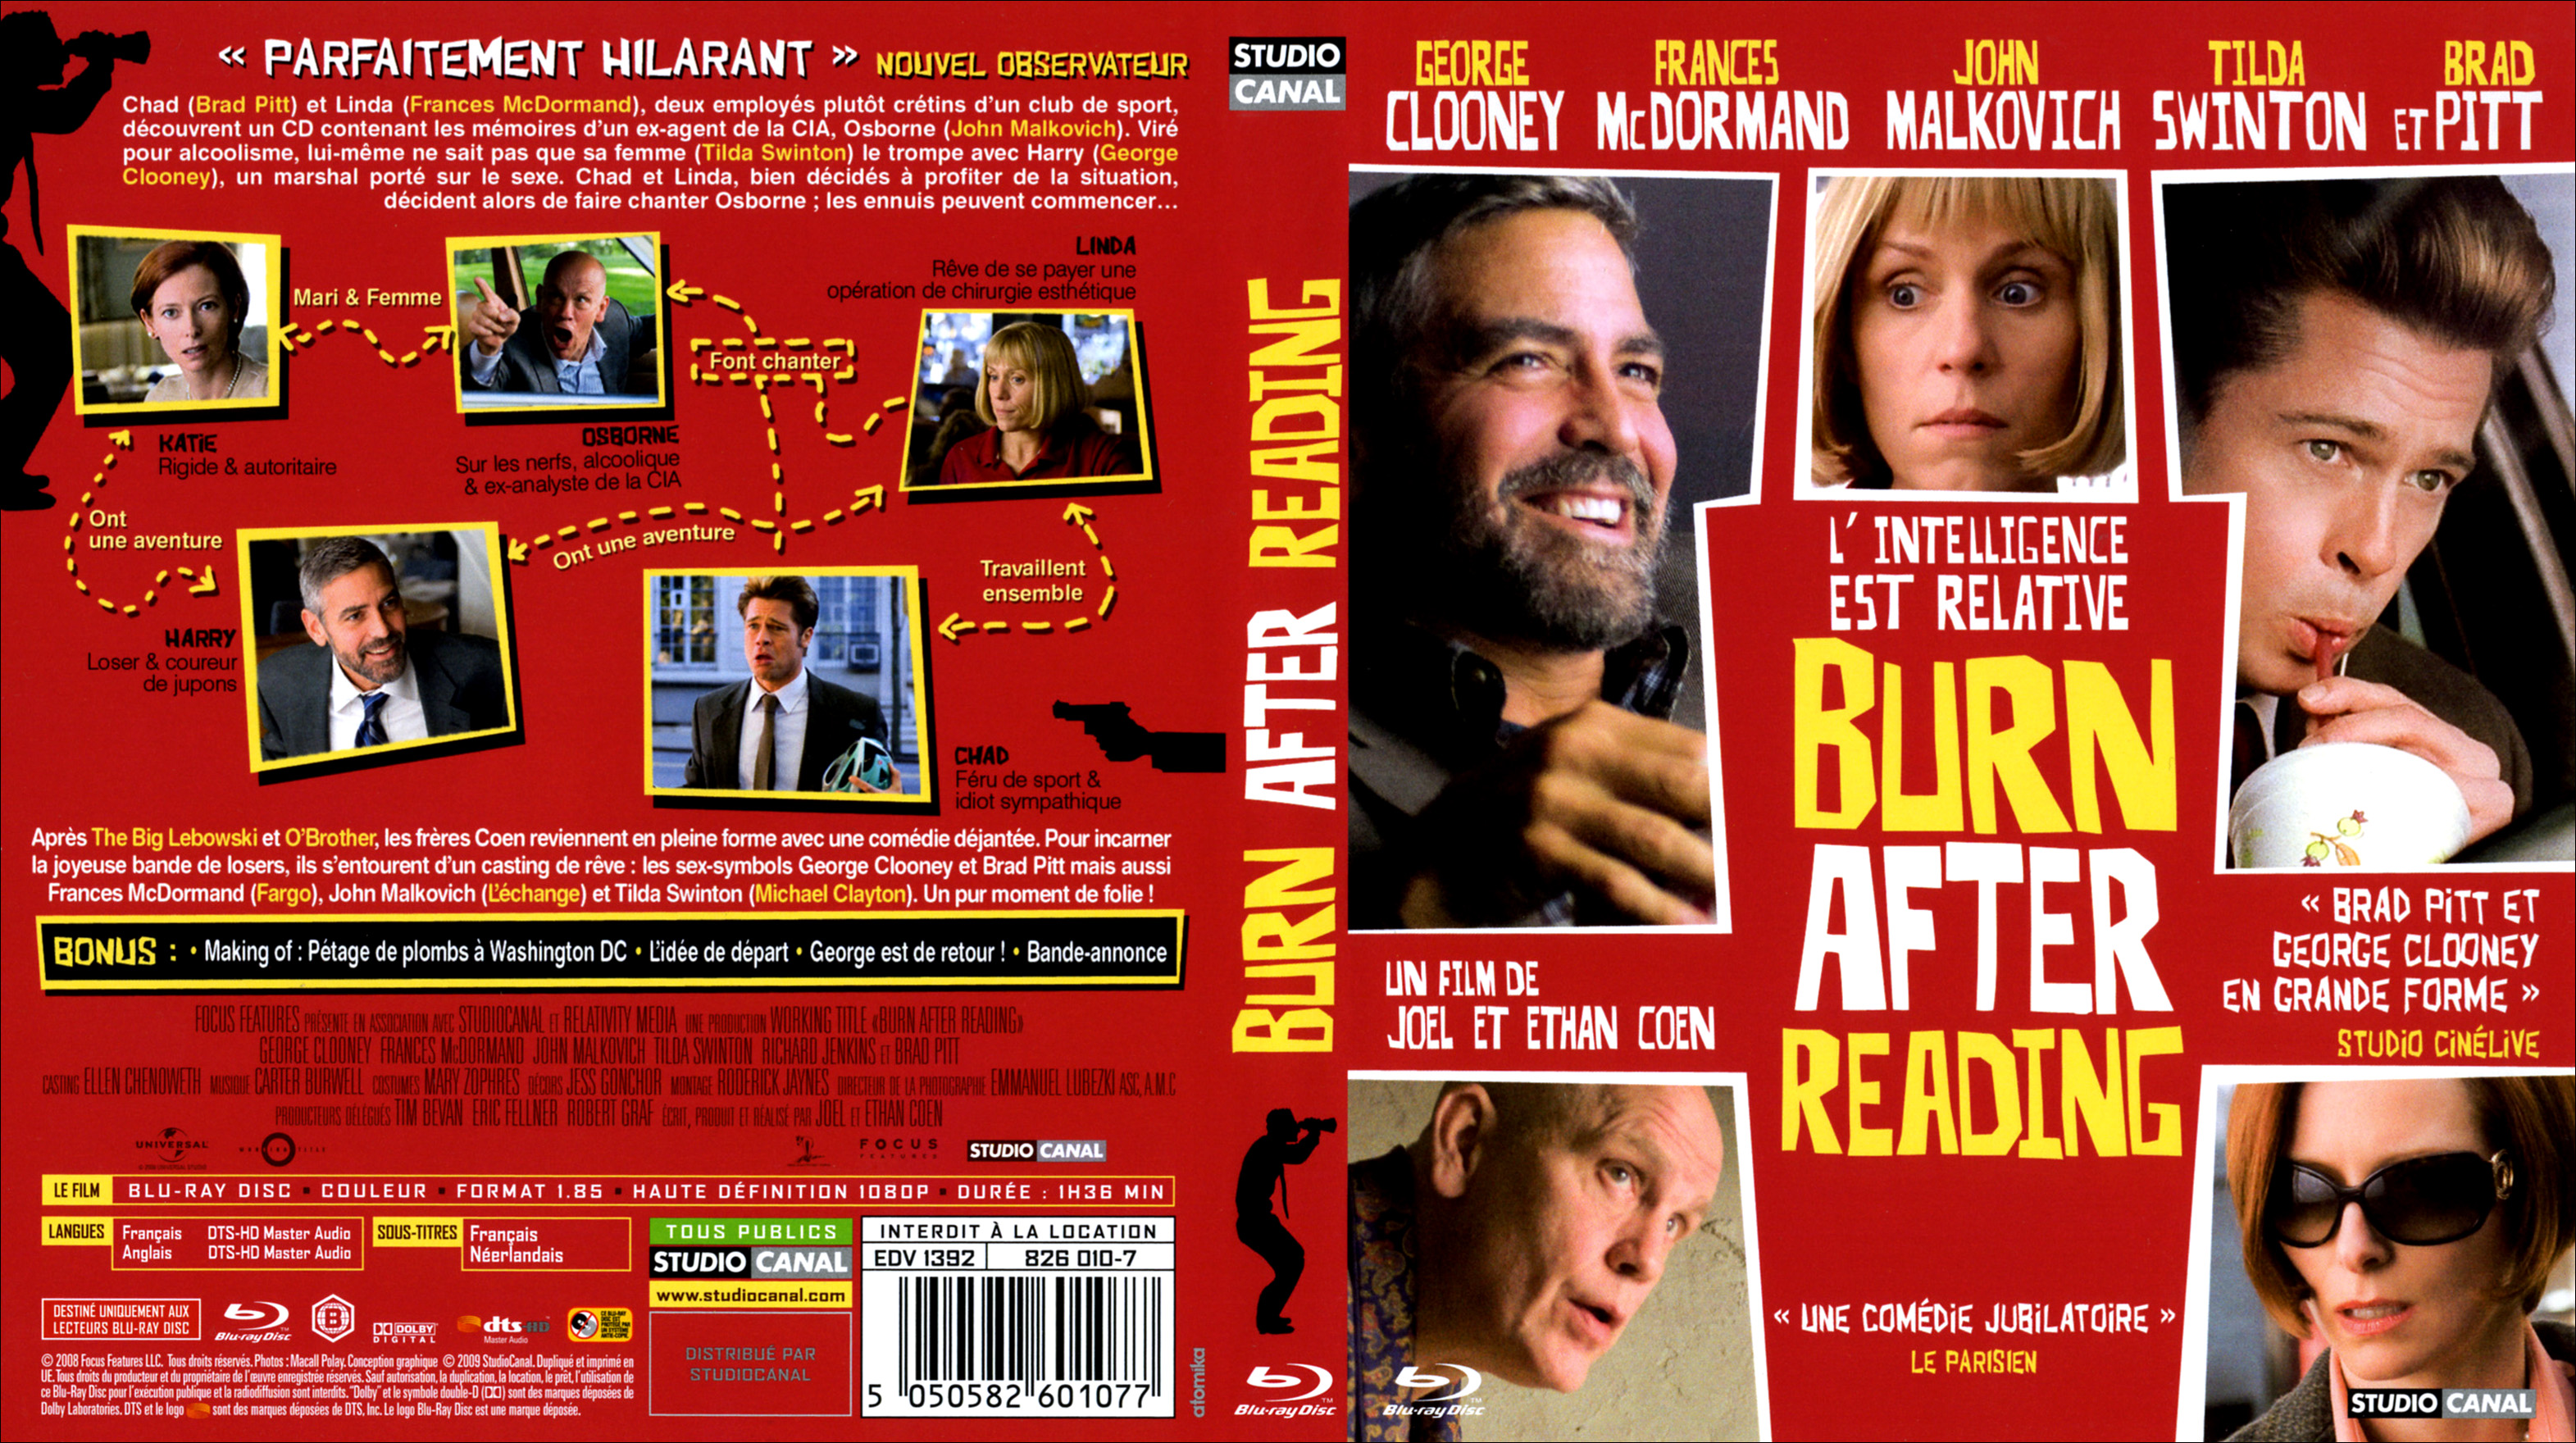 Jaquette DVD Burn after reading (BLU-RAY) v2